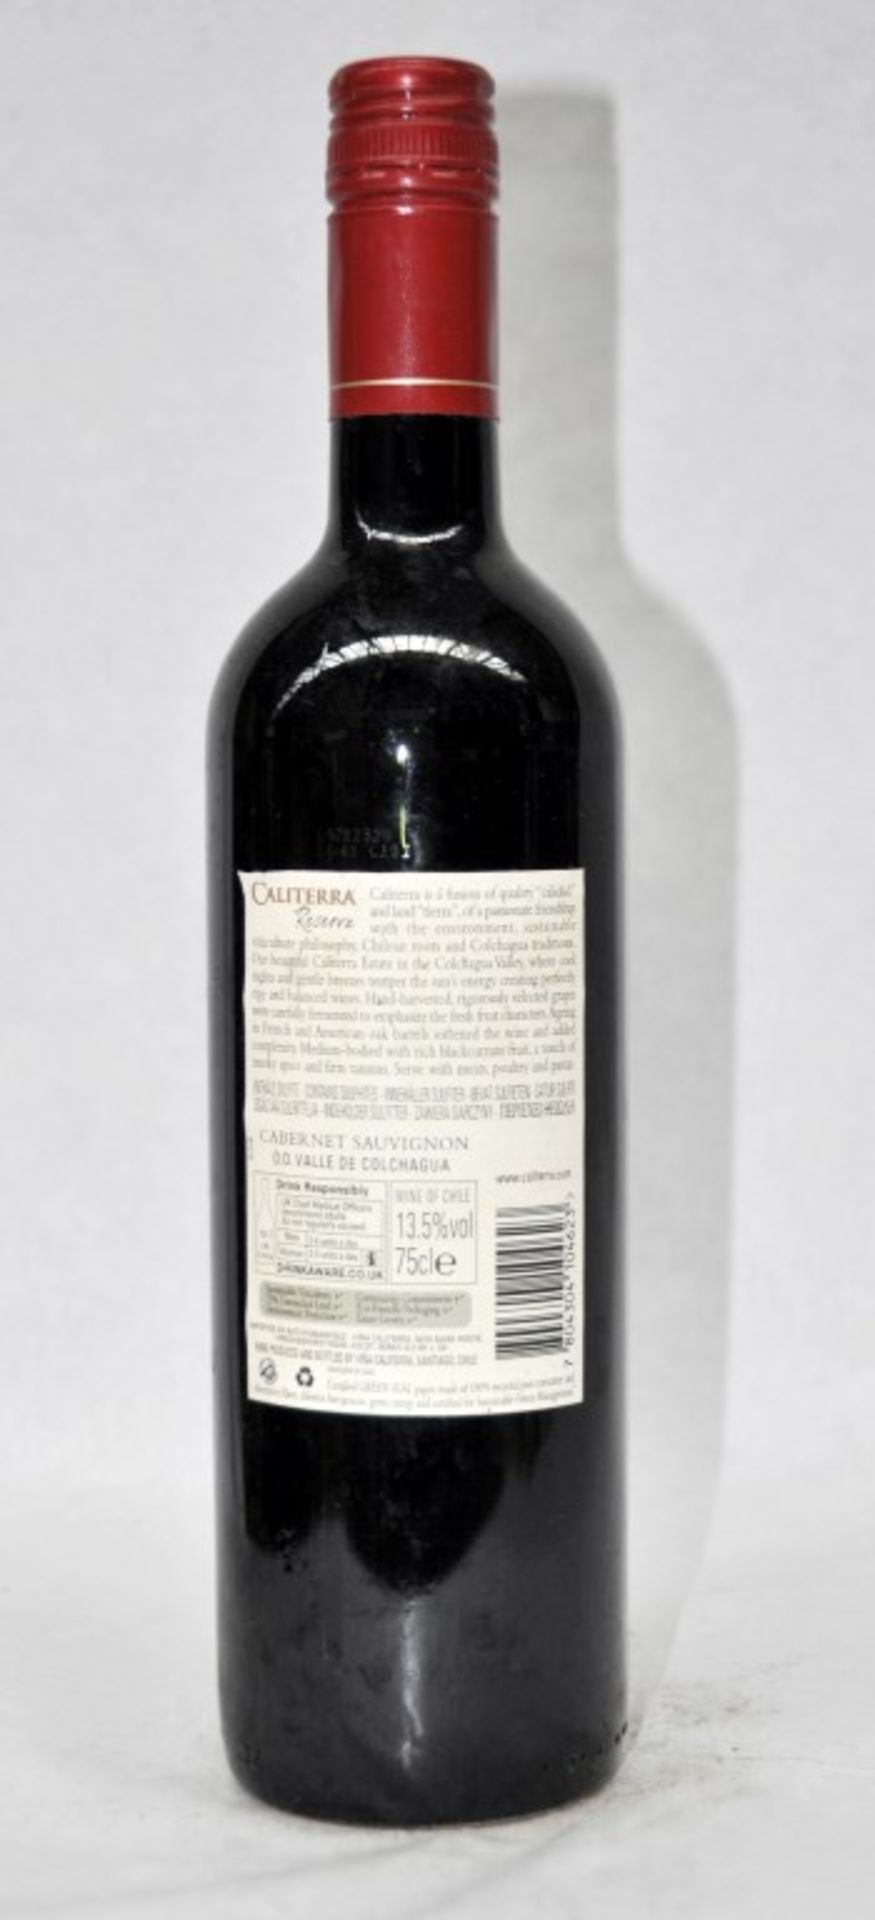 4 x Caliterra Reserva Sauvignon Estate Grown Red Wines - Chile - Years 2010/2011 - Bottle Size - Image 3 of 3